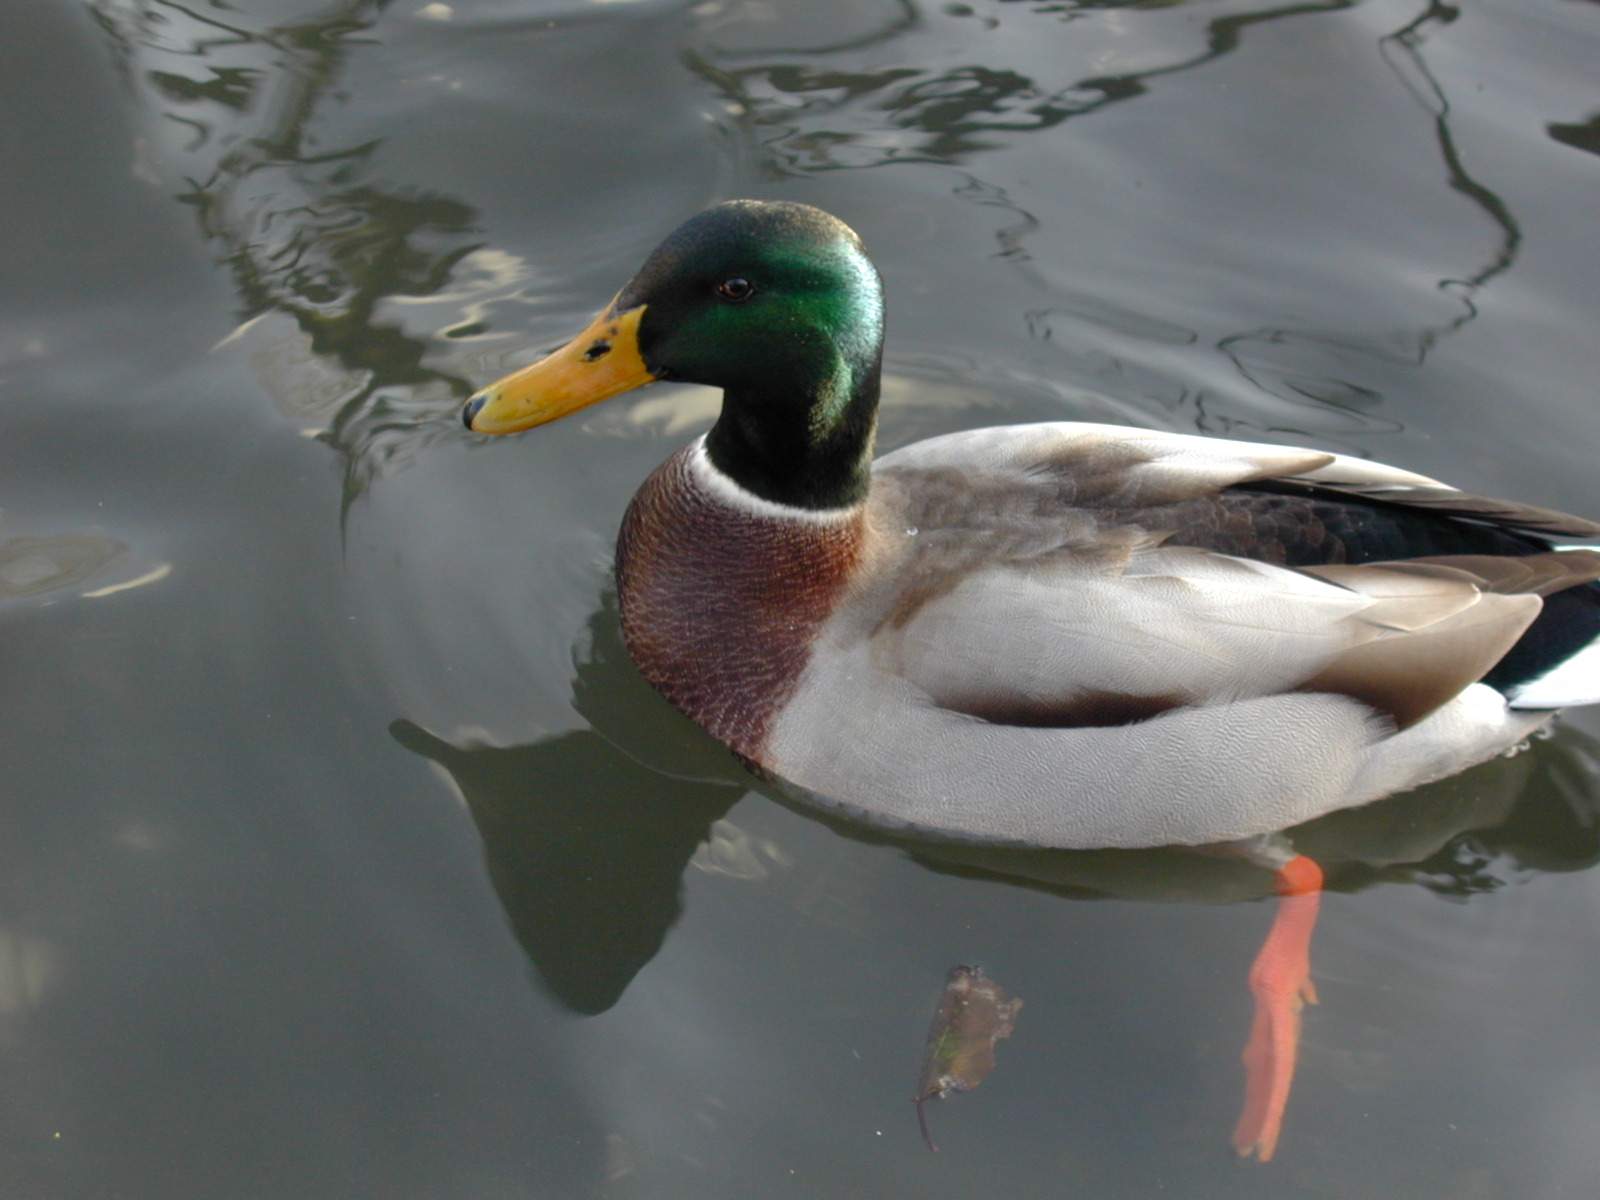 a duck floating in the water by itself